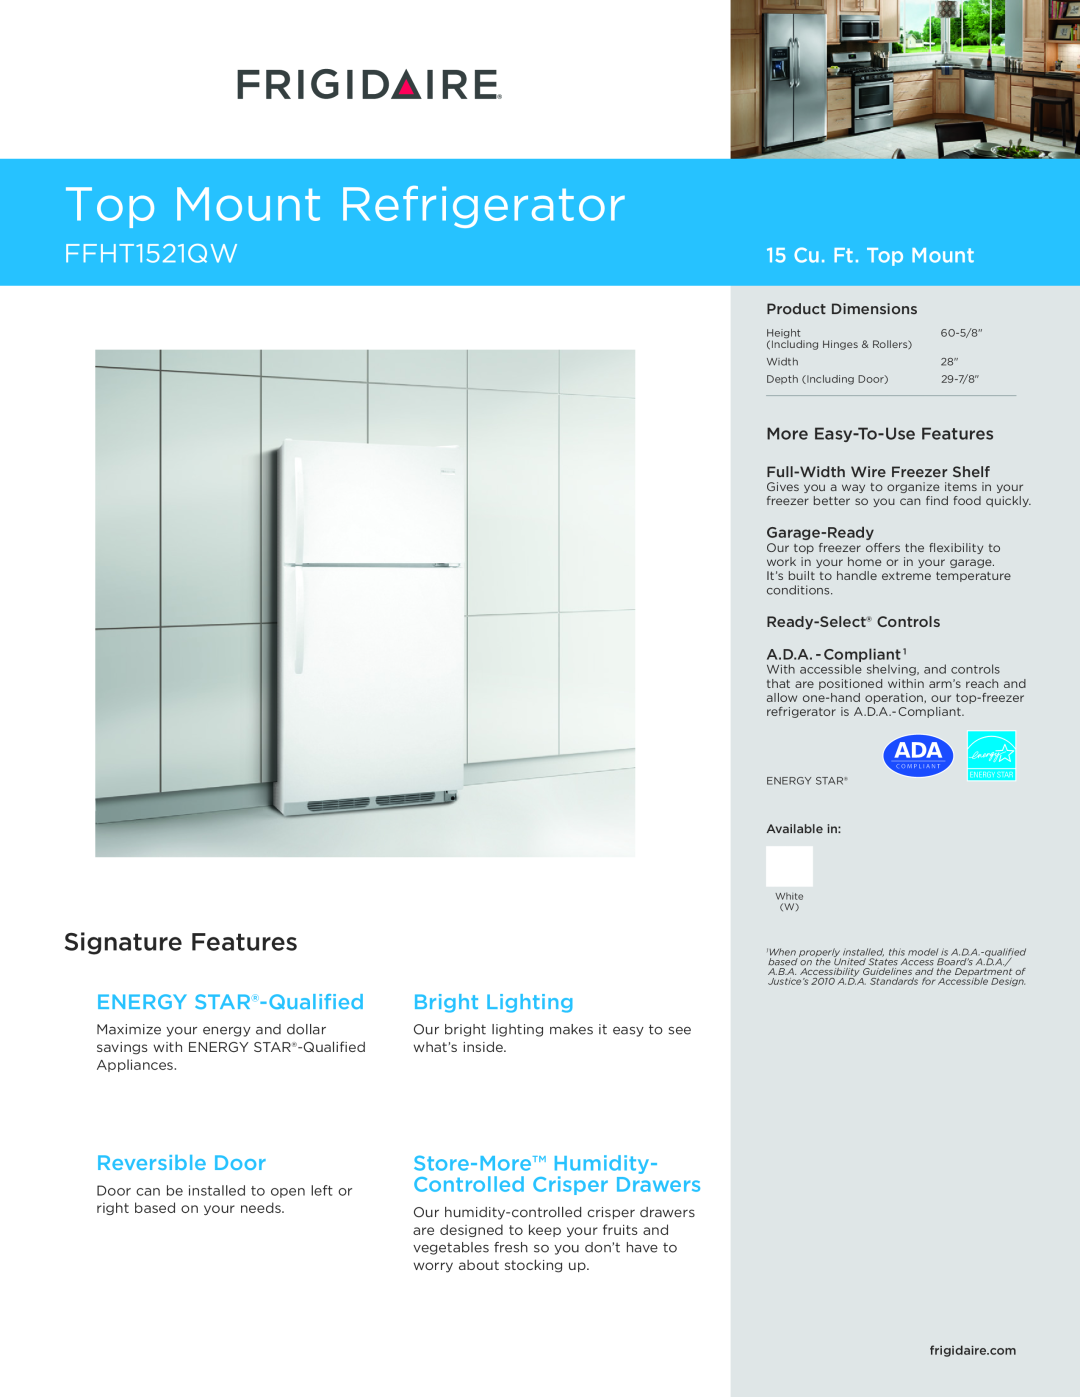 Frigidaire FFHT1521QW dimensions Top Mount Refrigerator, Signature Features, 15 Cu. Ft. Top Mount, ENERGY STAR-Qualified 